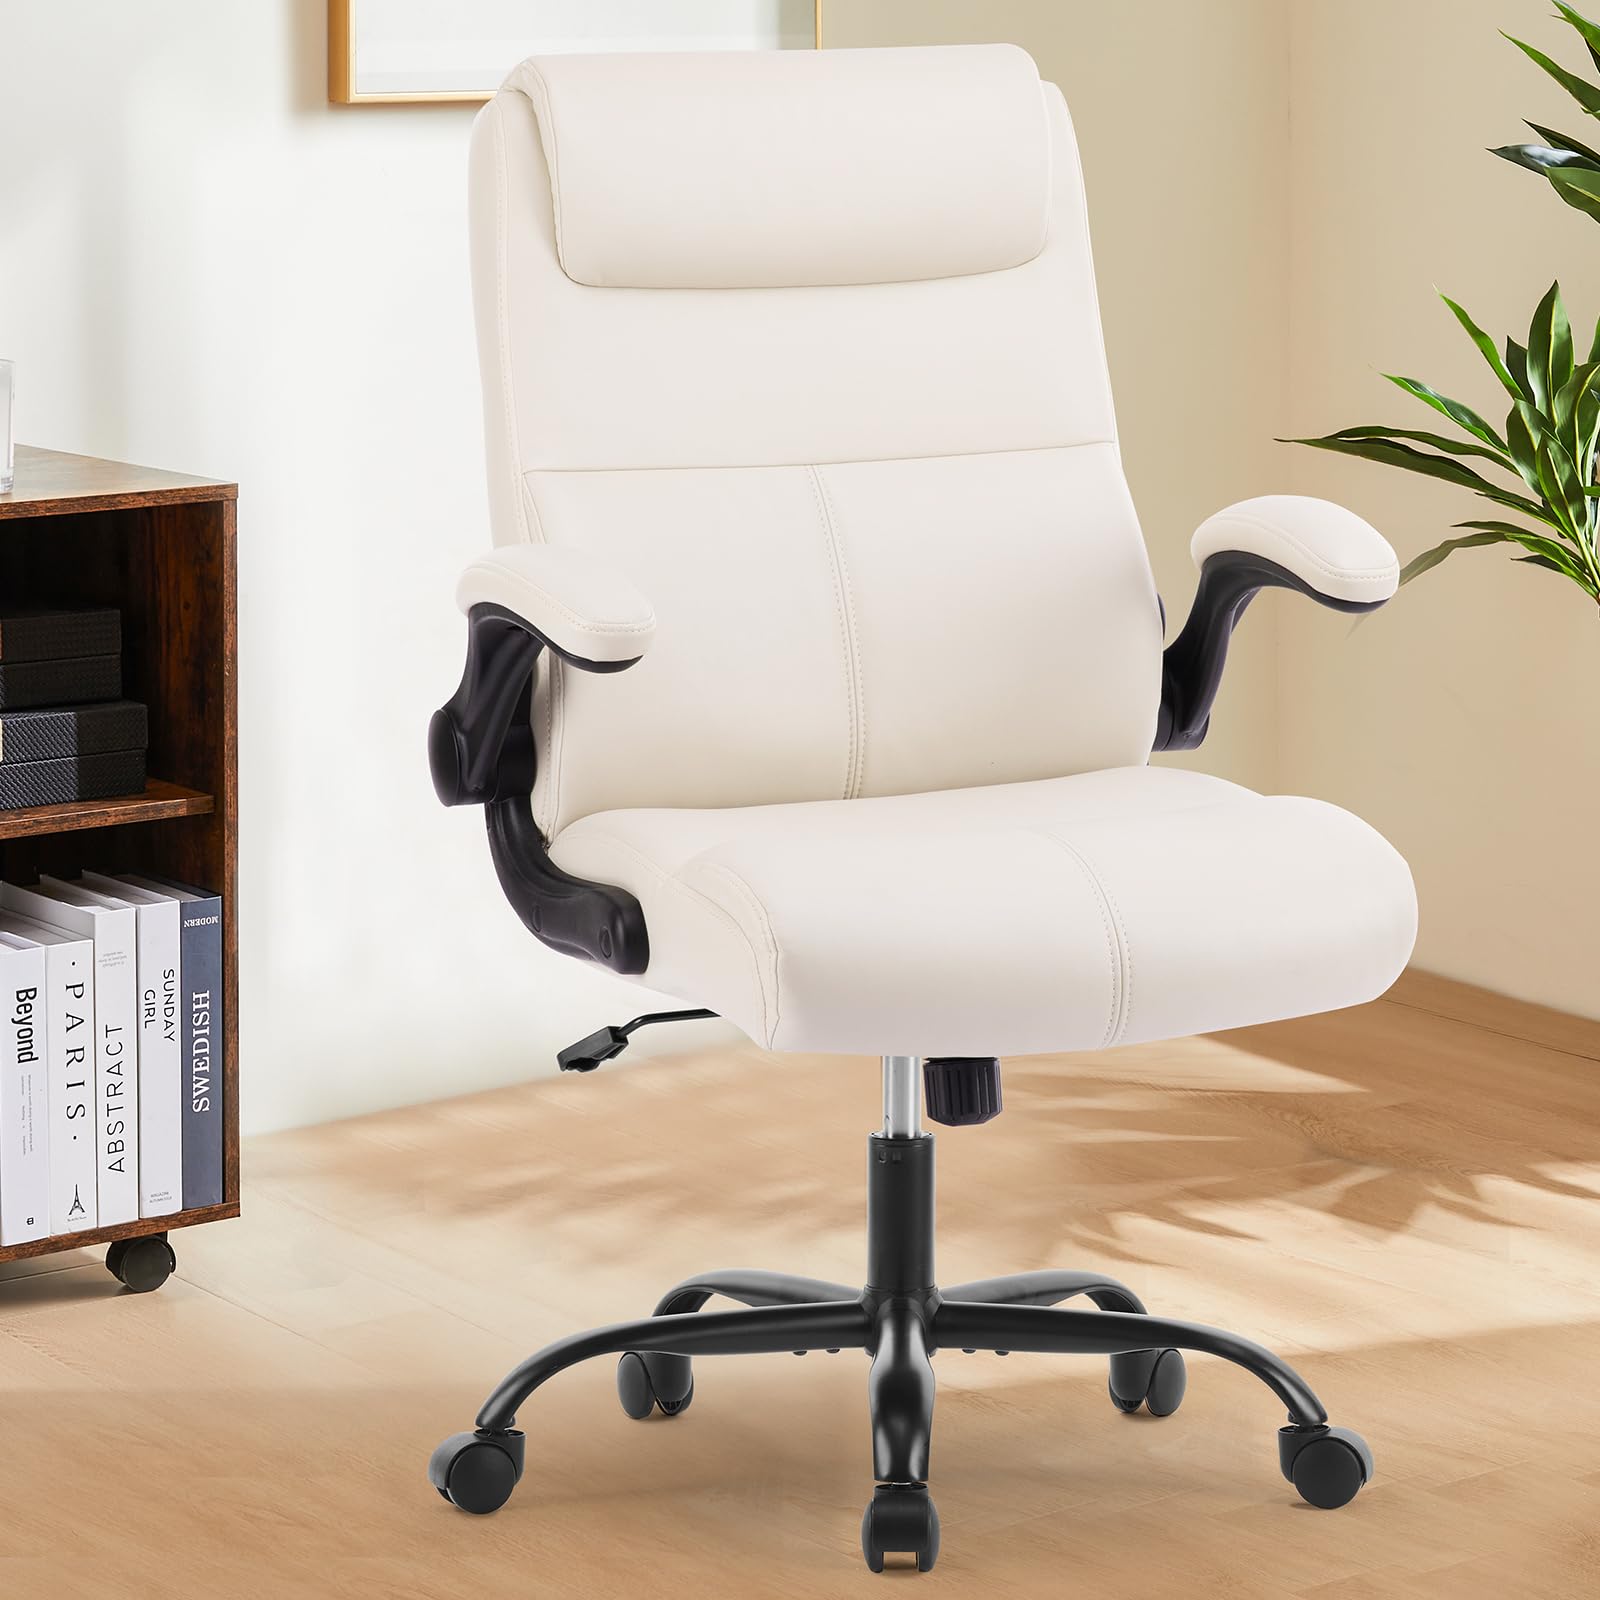 Sweetcrispy Ergonomic Executive Office Chair: Mid Back Desk Chair with Wheels Computer Chair with Lumbar Support Height Adjustable PU Leather Office Chair Flip up Arms, Beige White